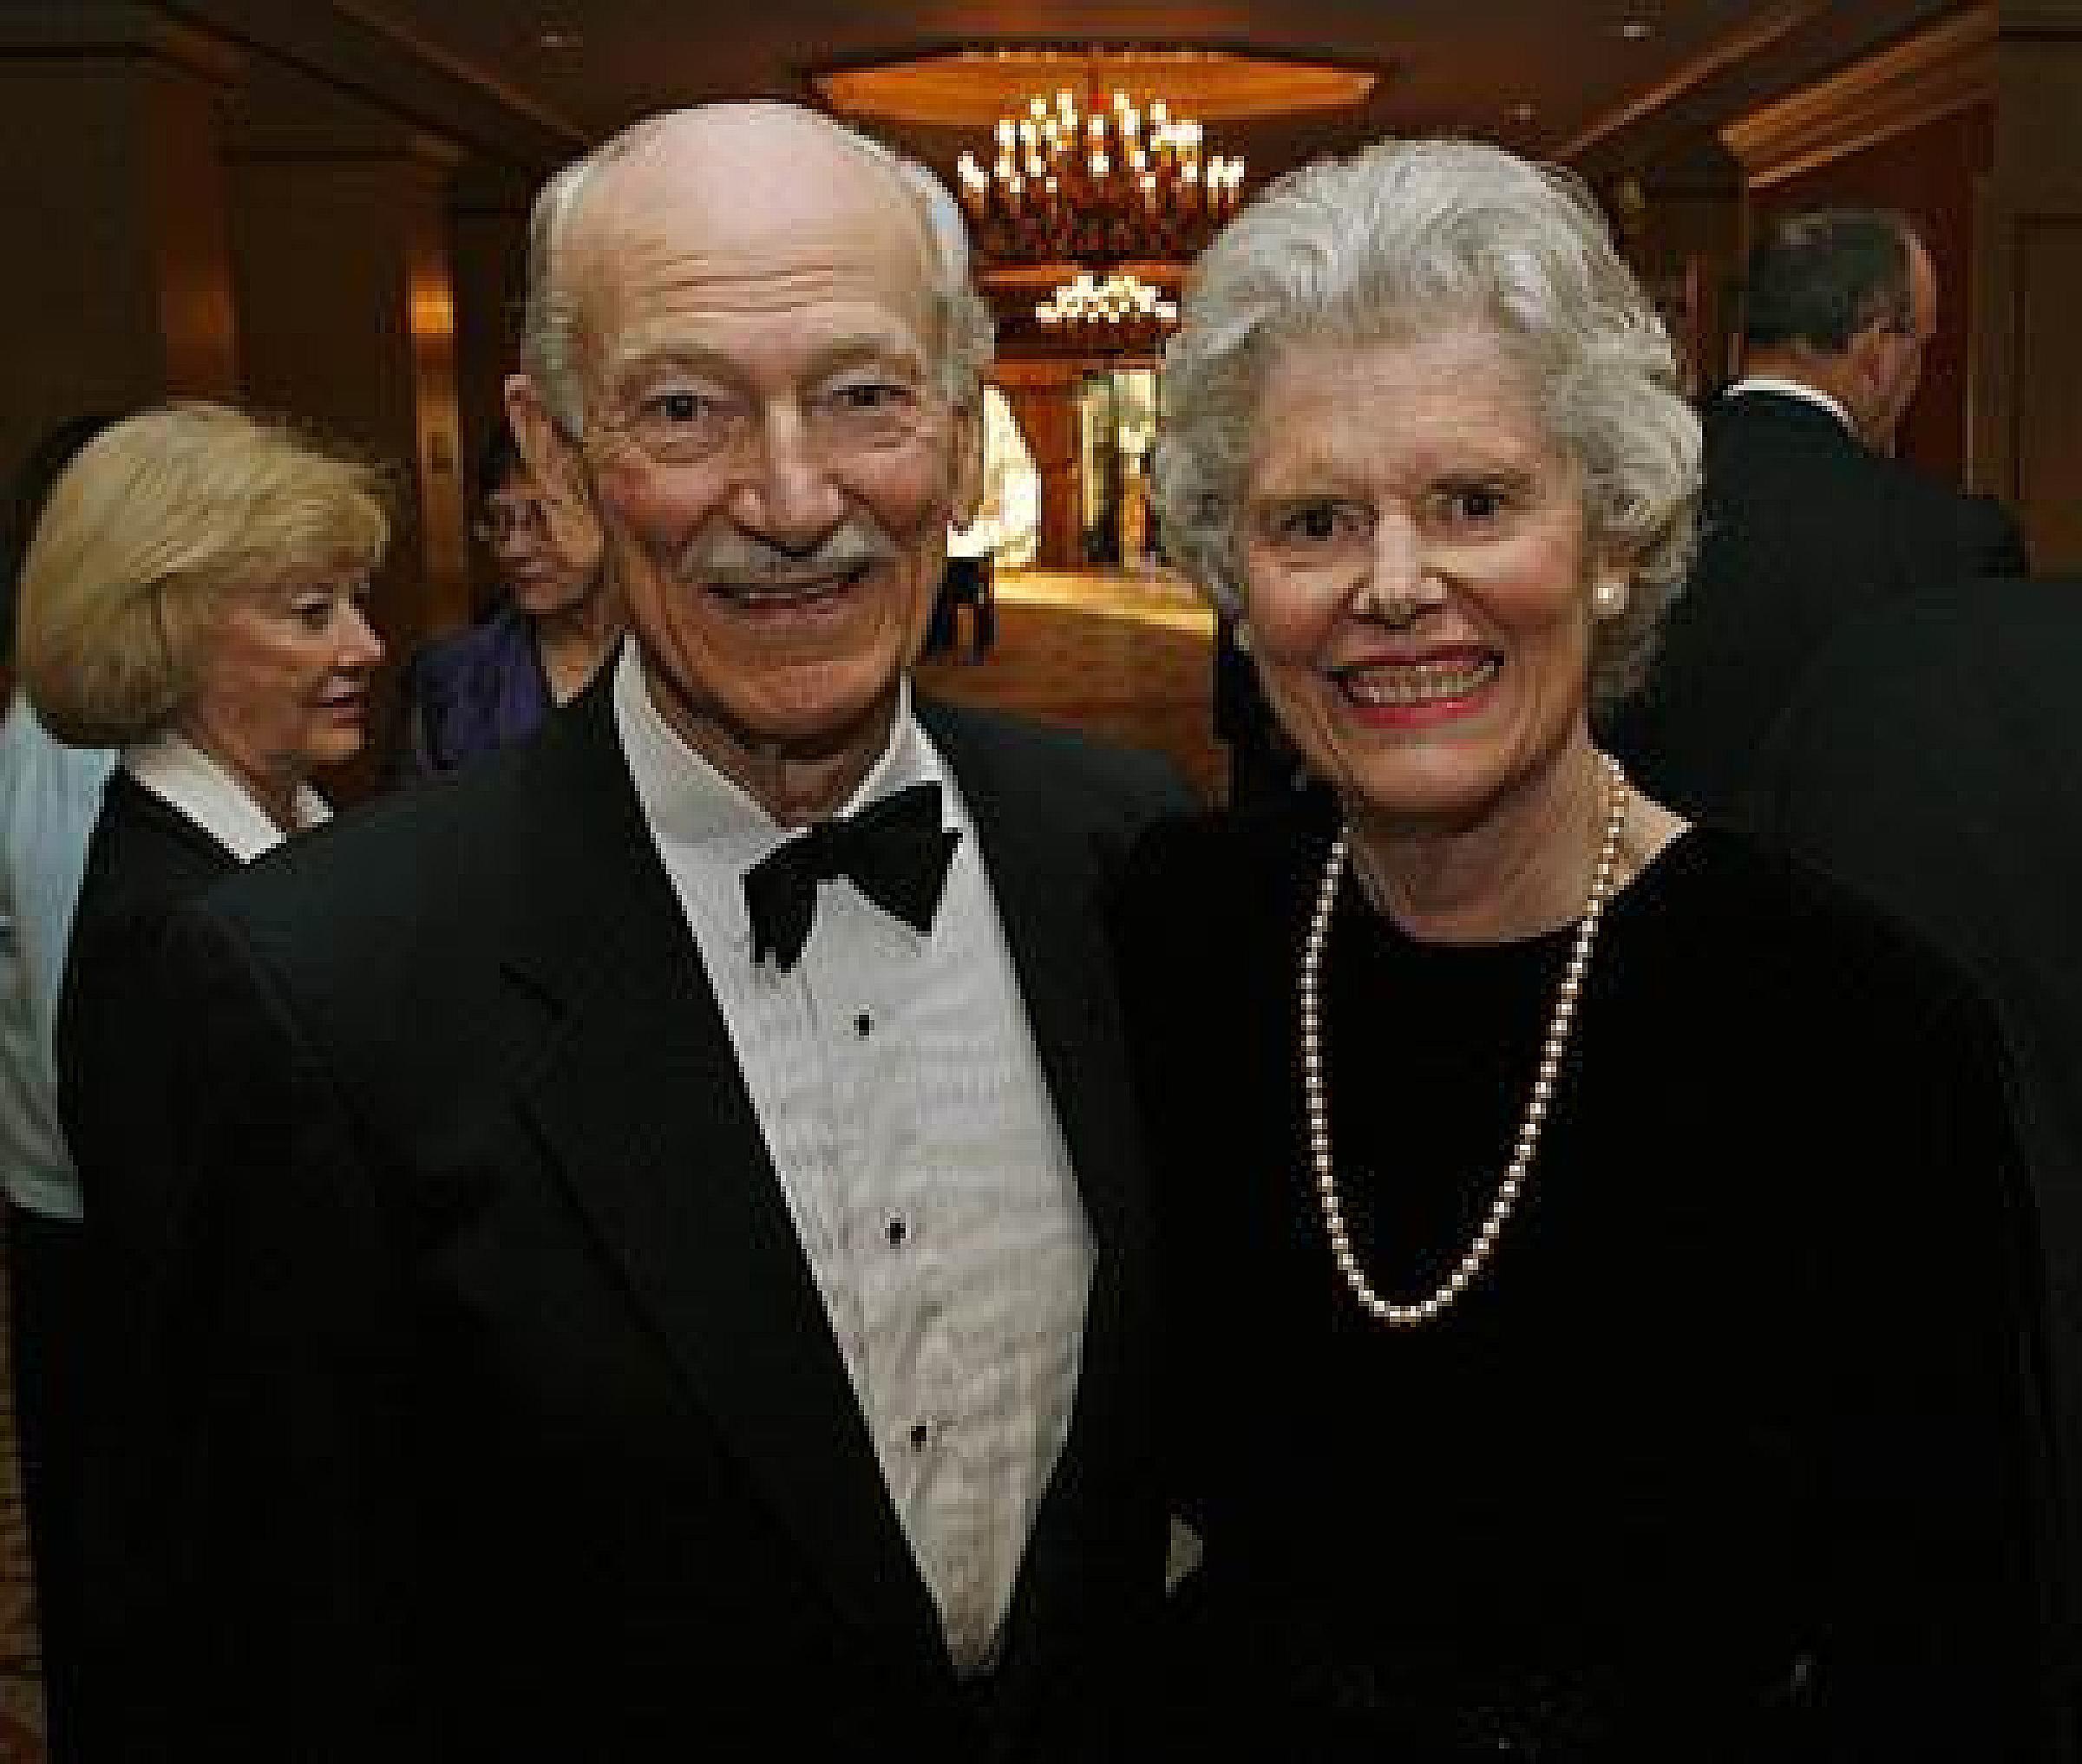 Richard and Carol Fay dressed up at an event